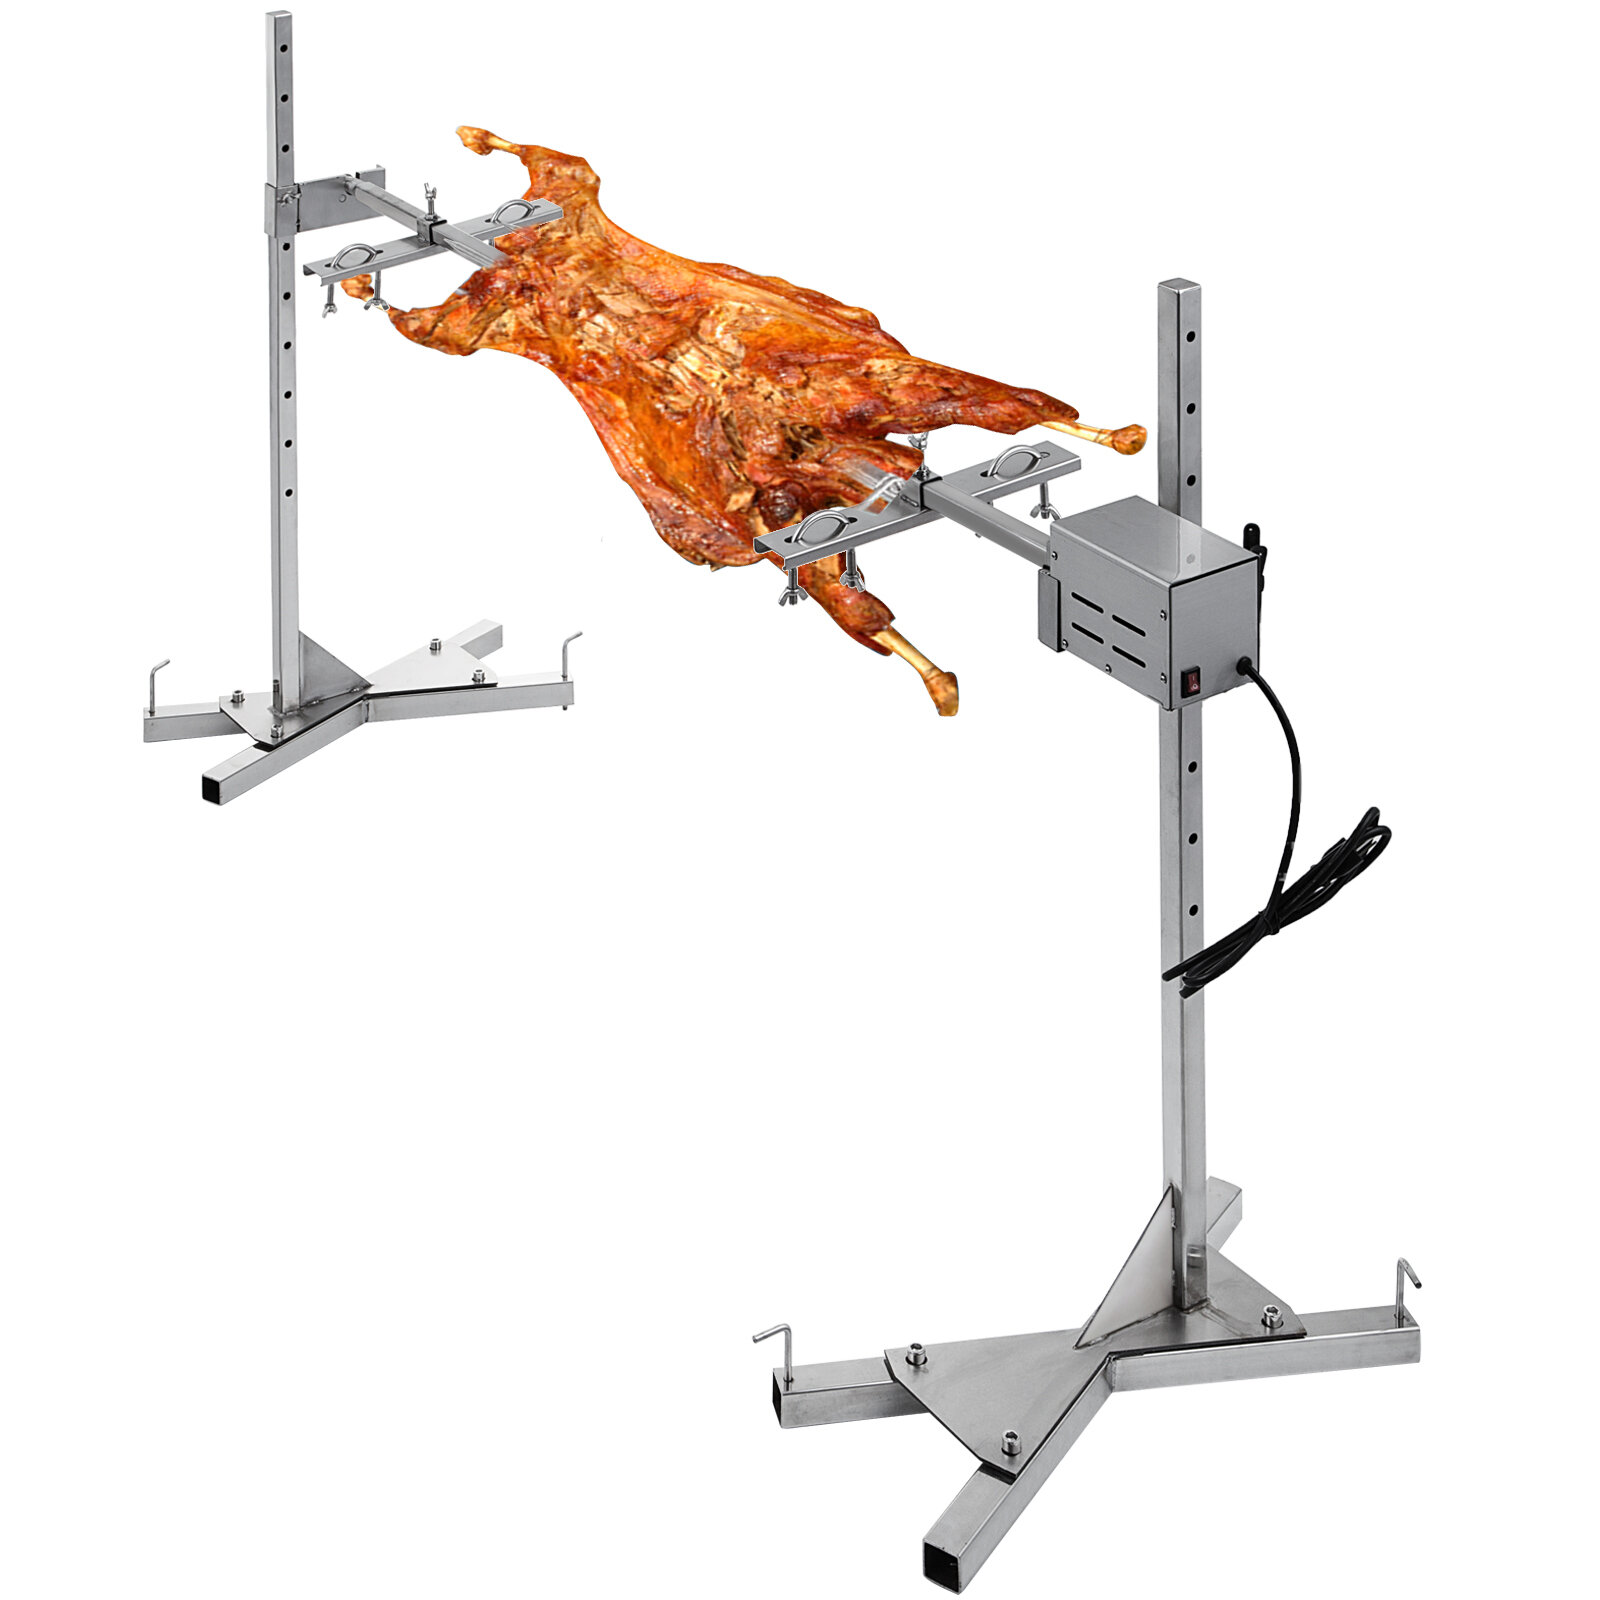 46" Large Stainless Steel BBQ Pig Lamb Chicken Spit Roaster Rotisserie Cooking 